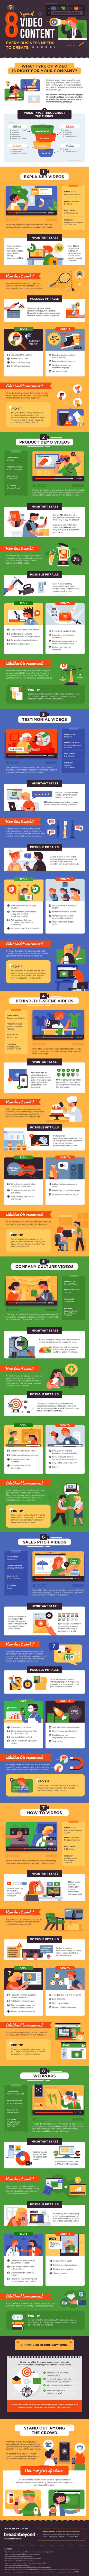 8-types-video-content-infographic